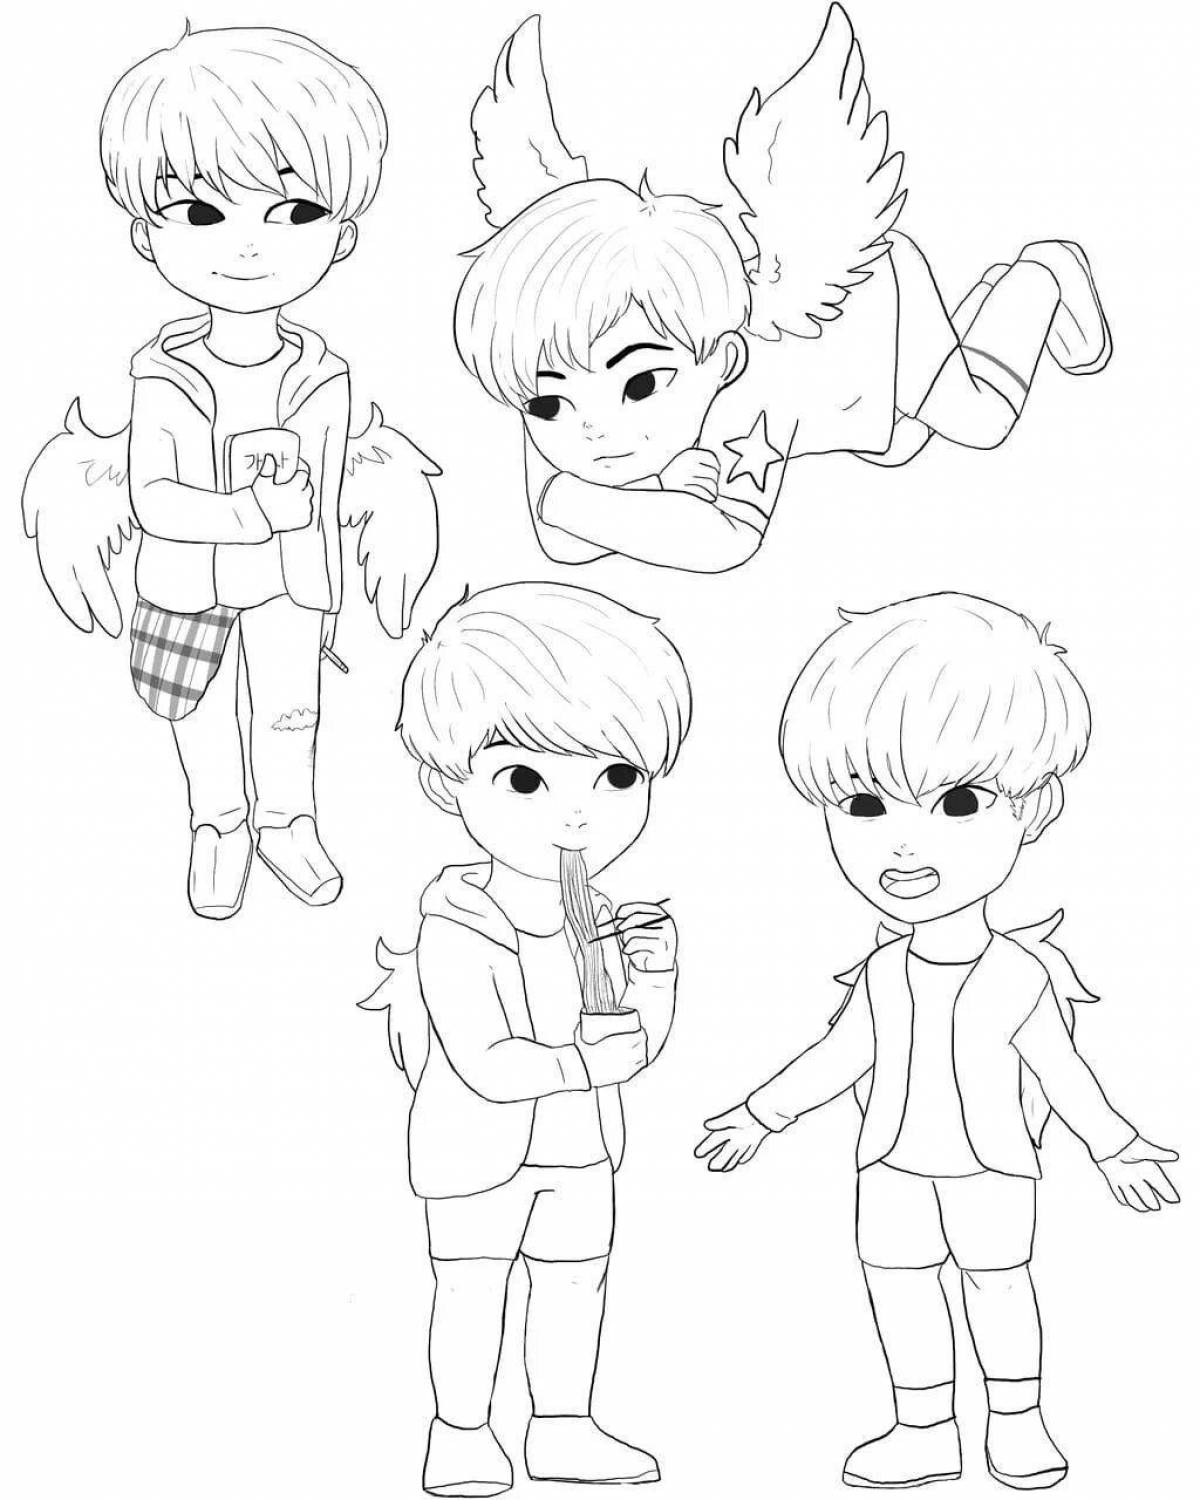 Bts creative coloring game